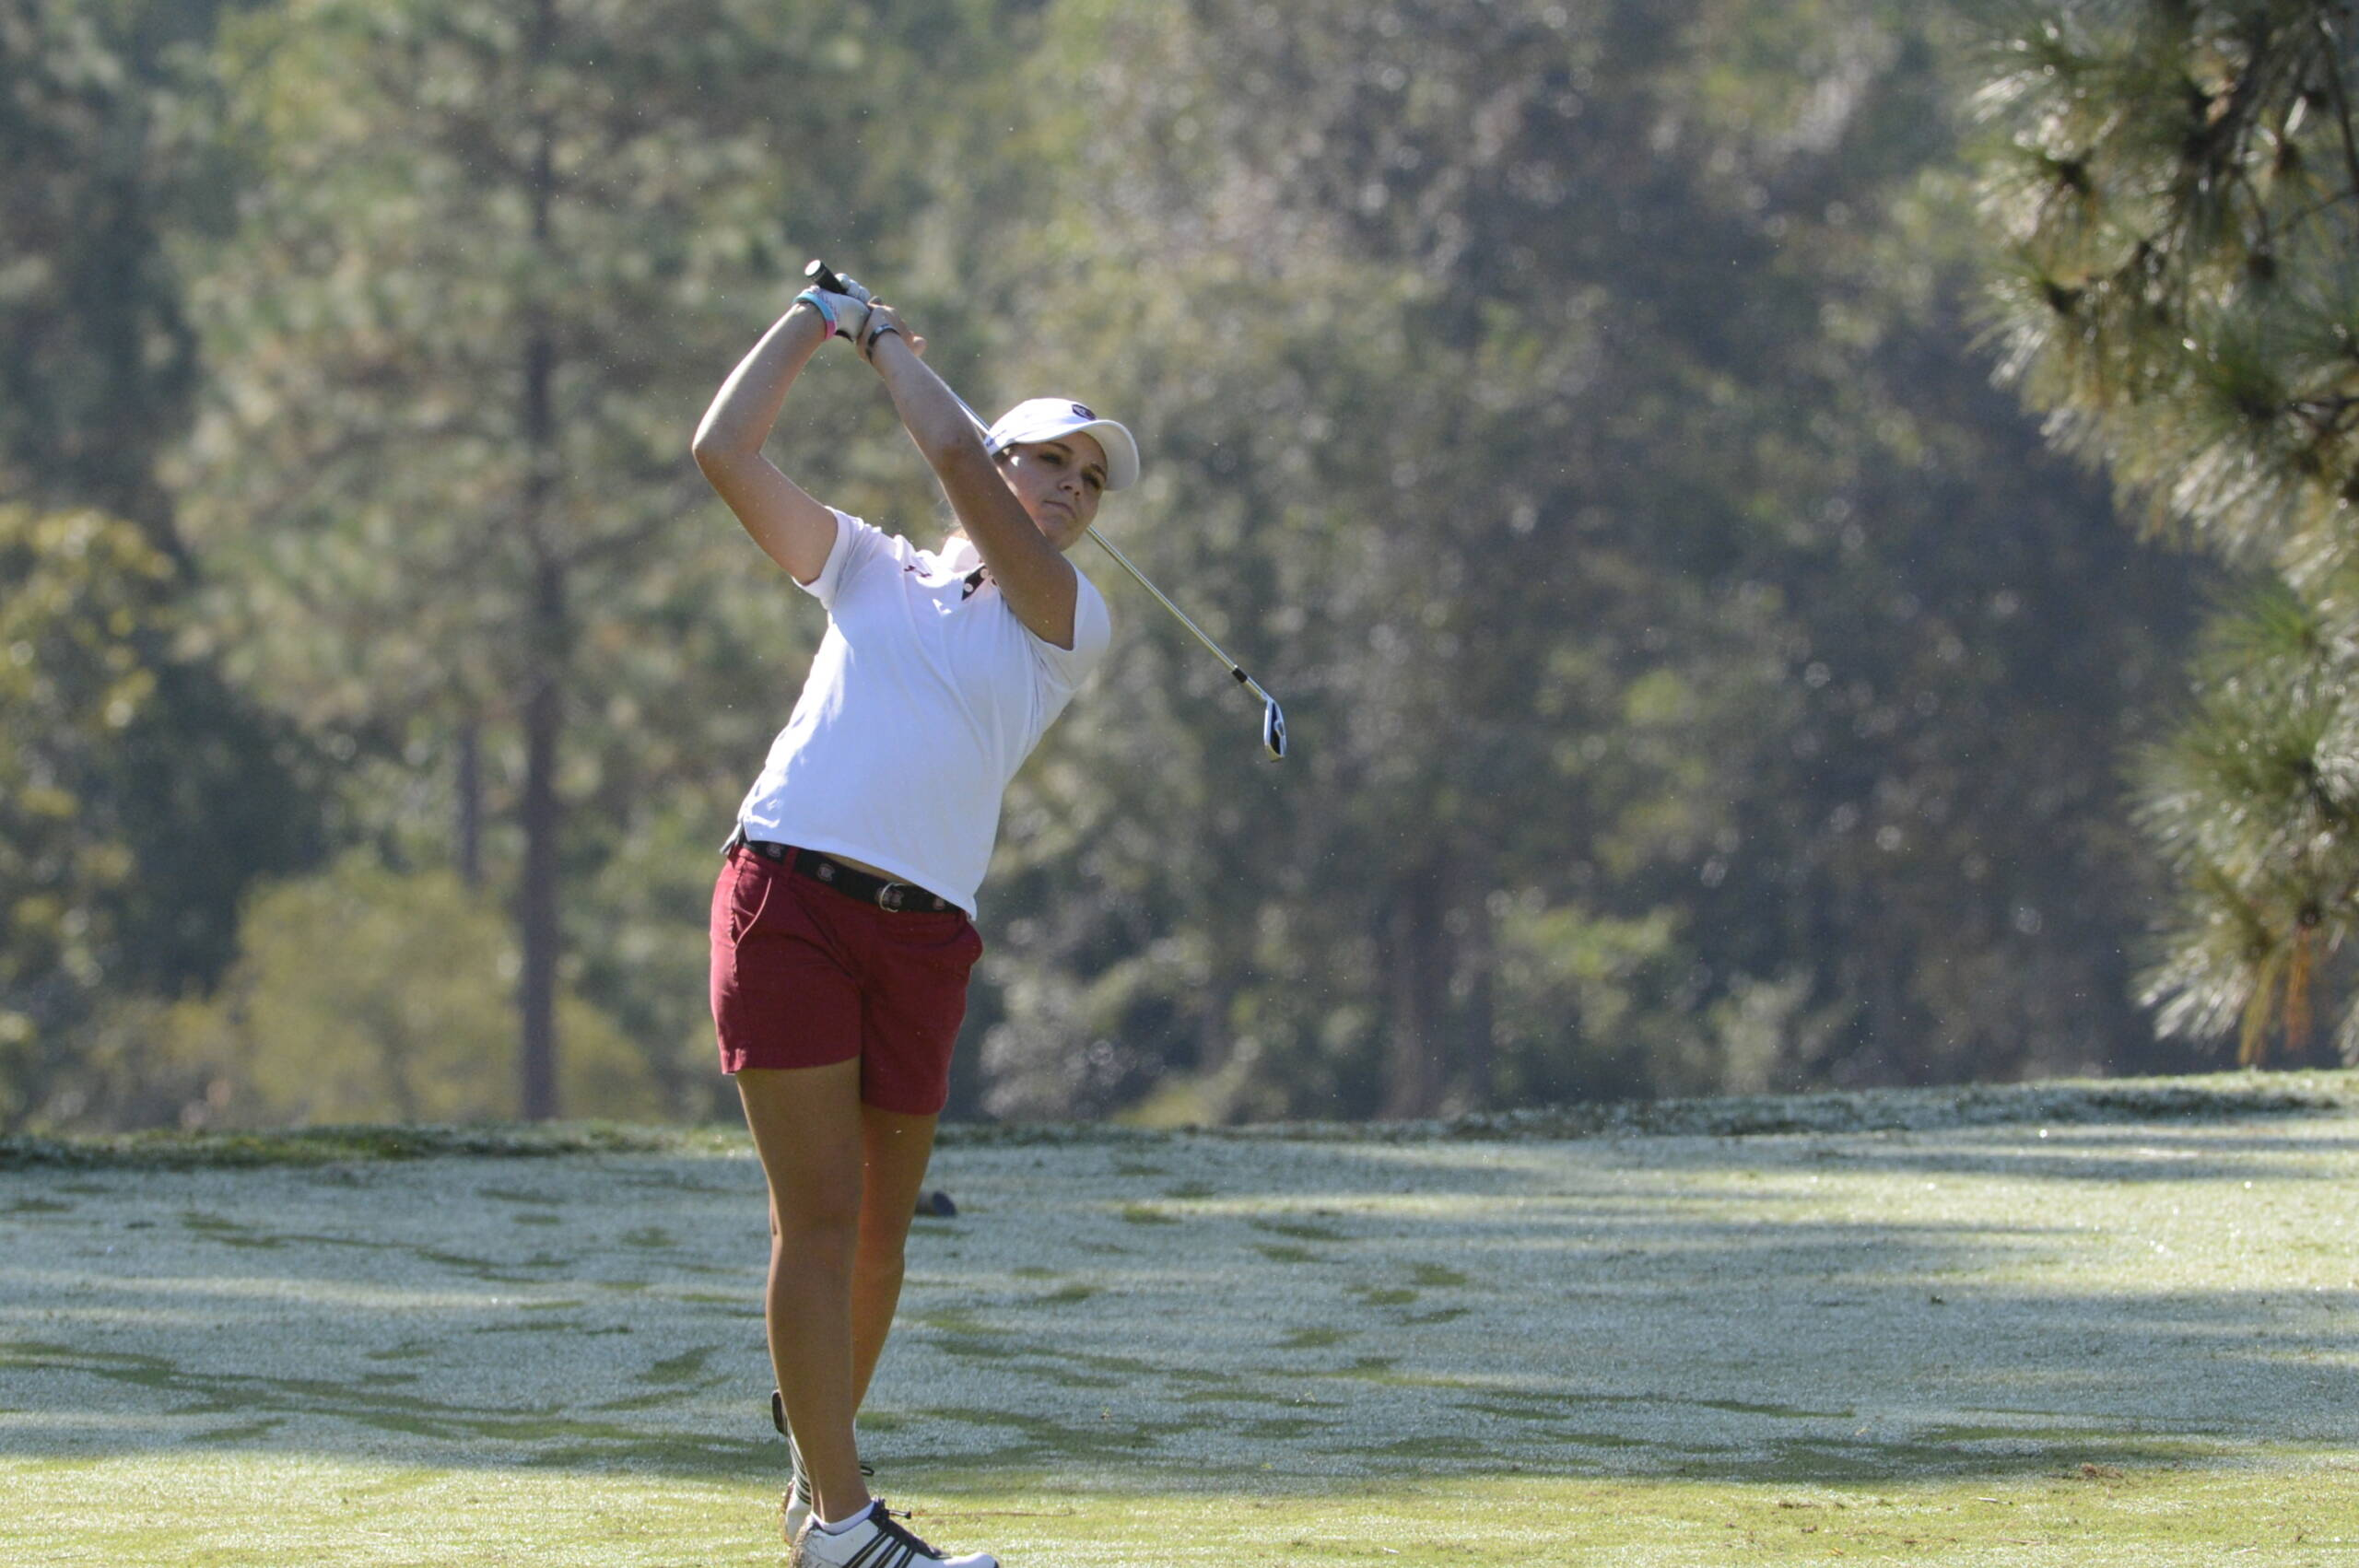 Gamecocks in Fourth Place After First Round of Darius Rucker Intercollegiate